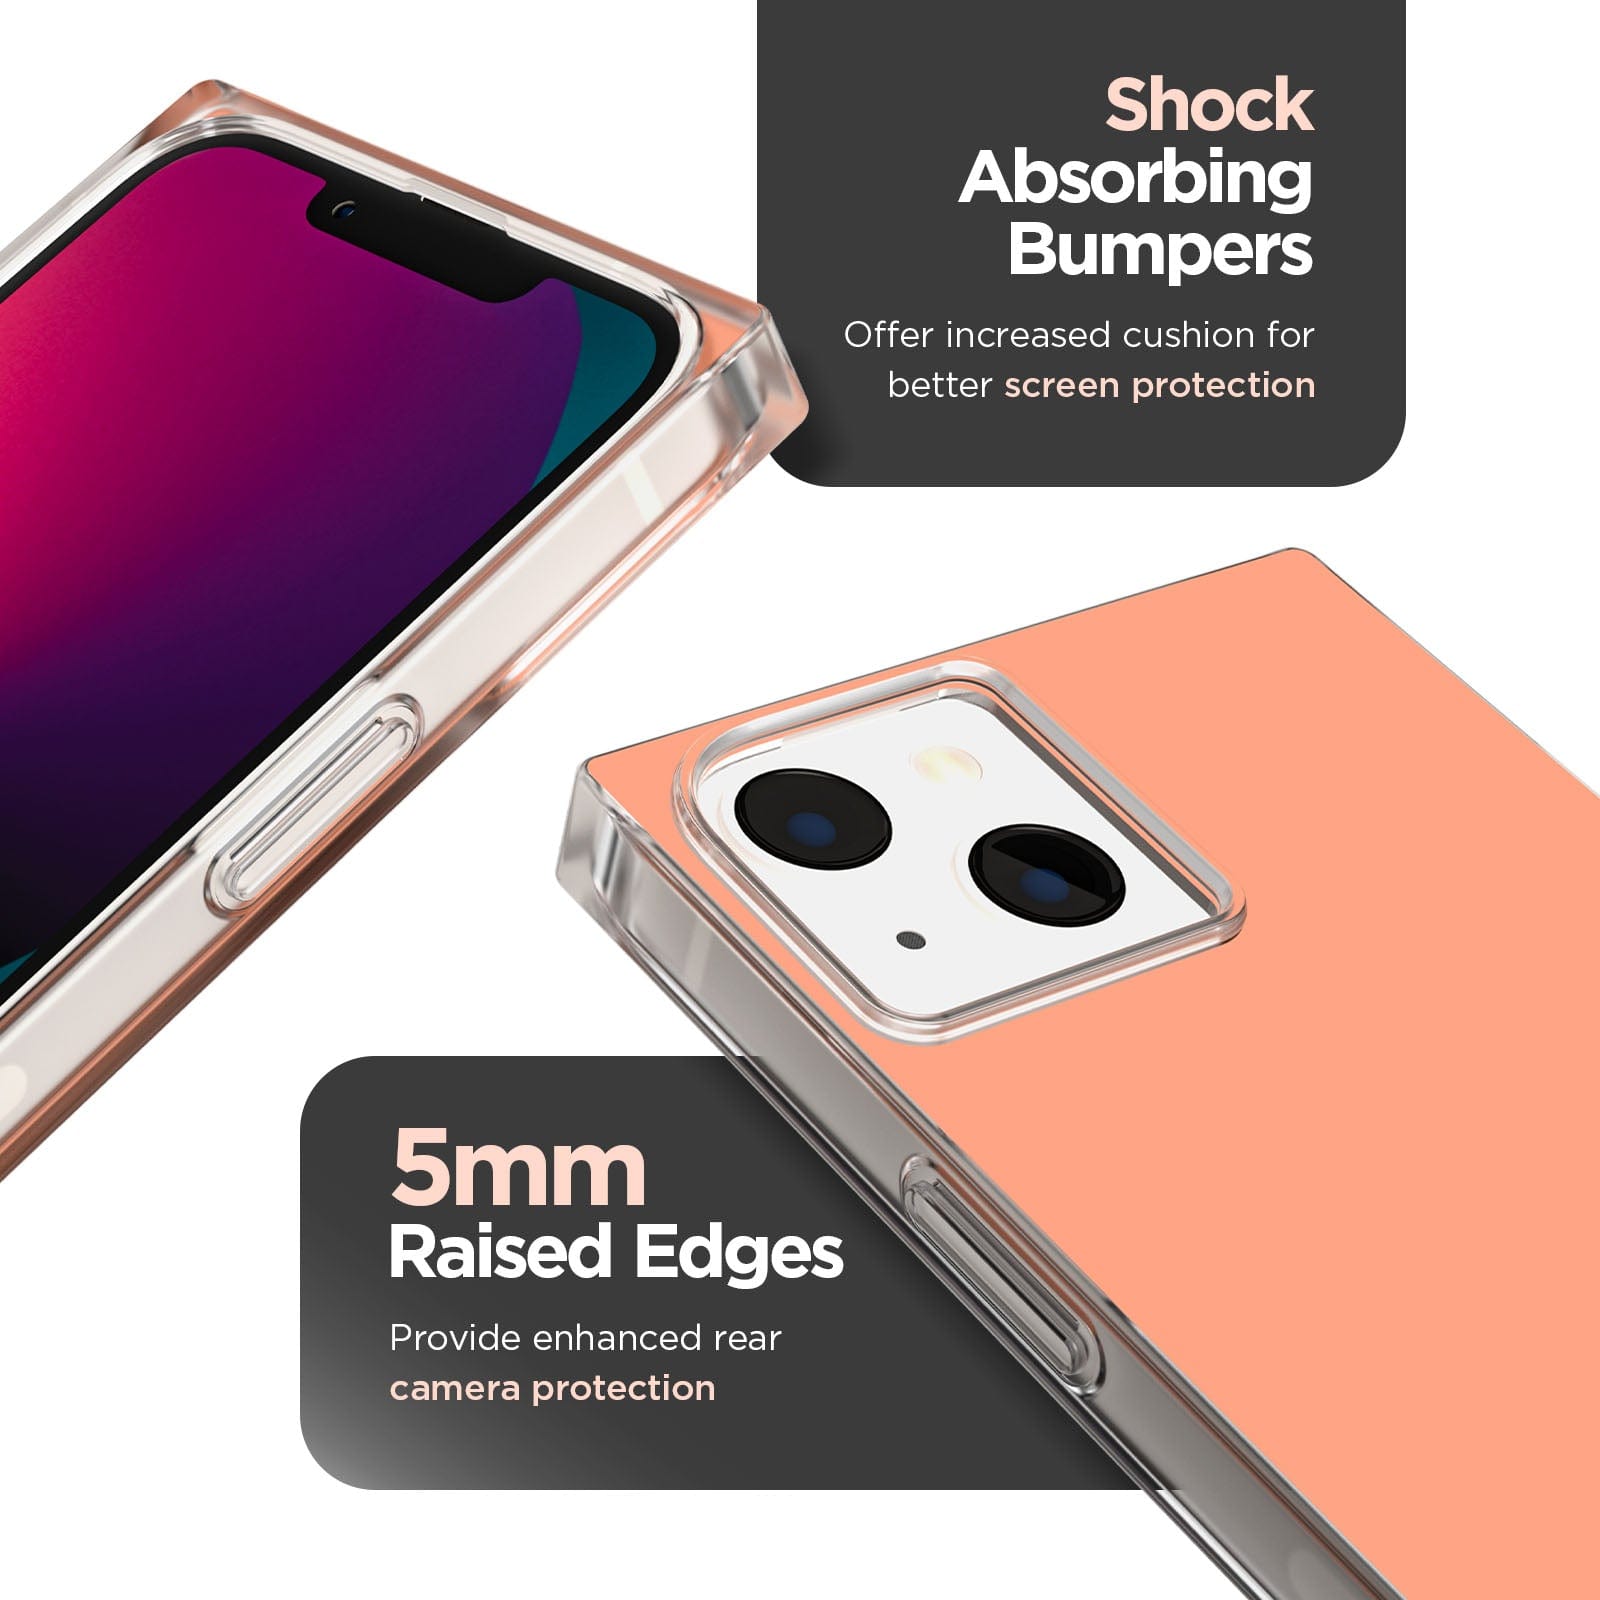 Shock absorbing bumpers offer increased cushion for better screen protection. 5mm raised edges provide enhanced rear camera protection. color::Clay Pink